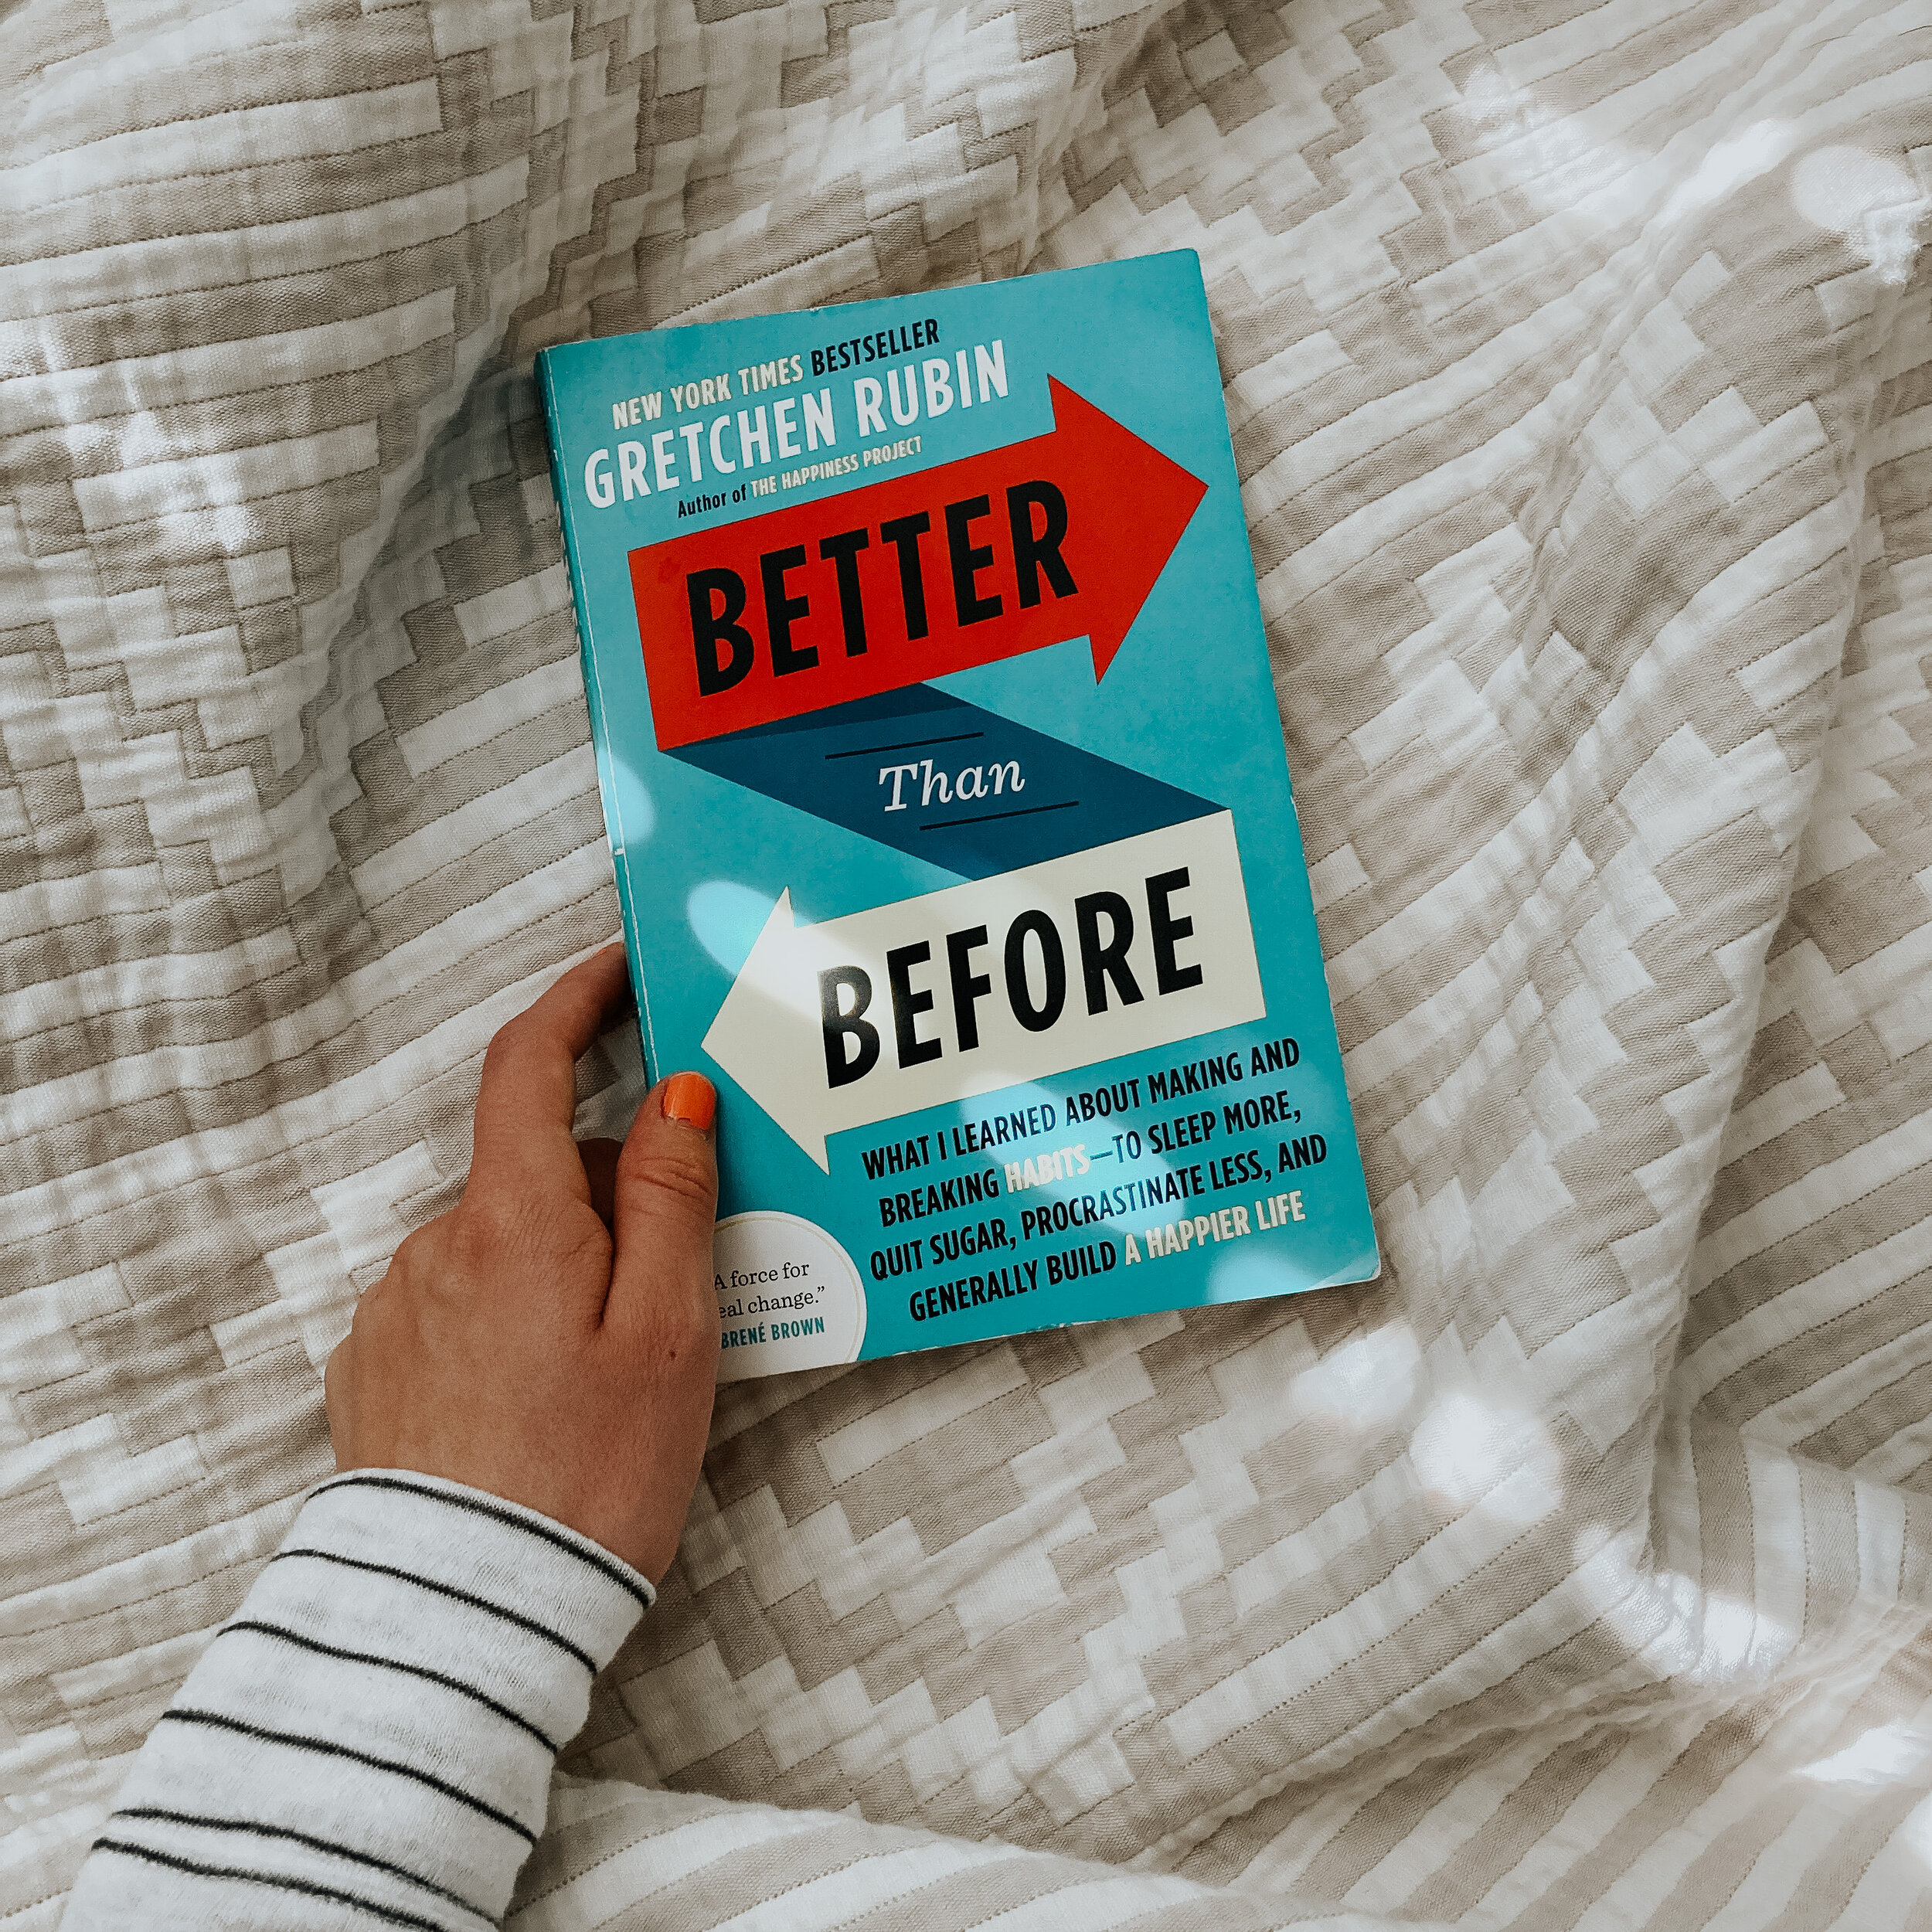 Holding Better than Before by Gretchen Rubin